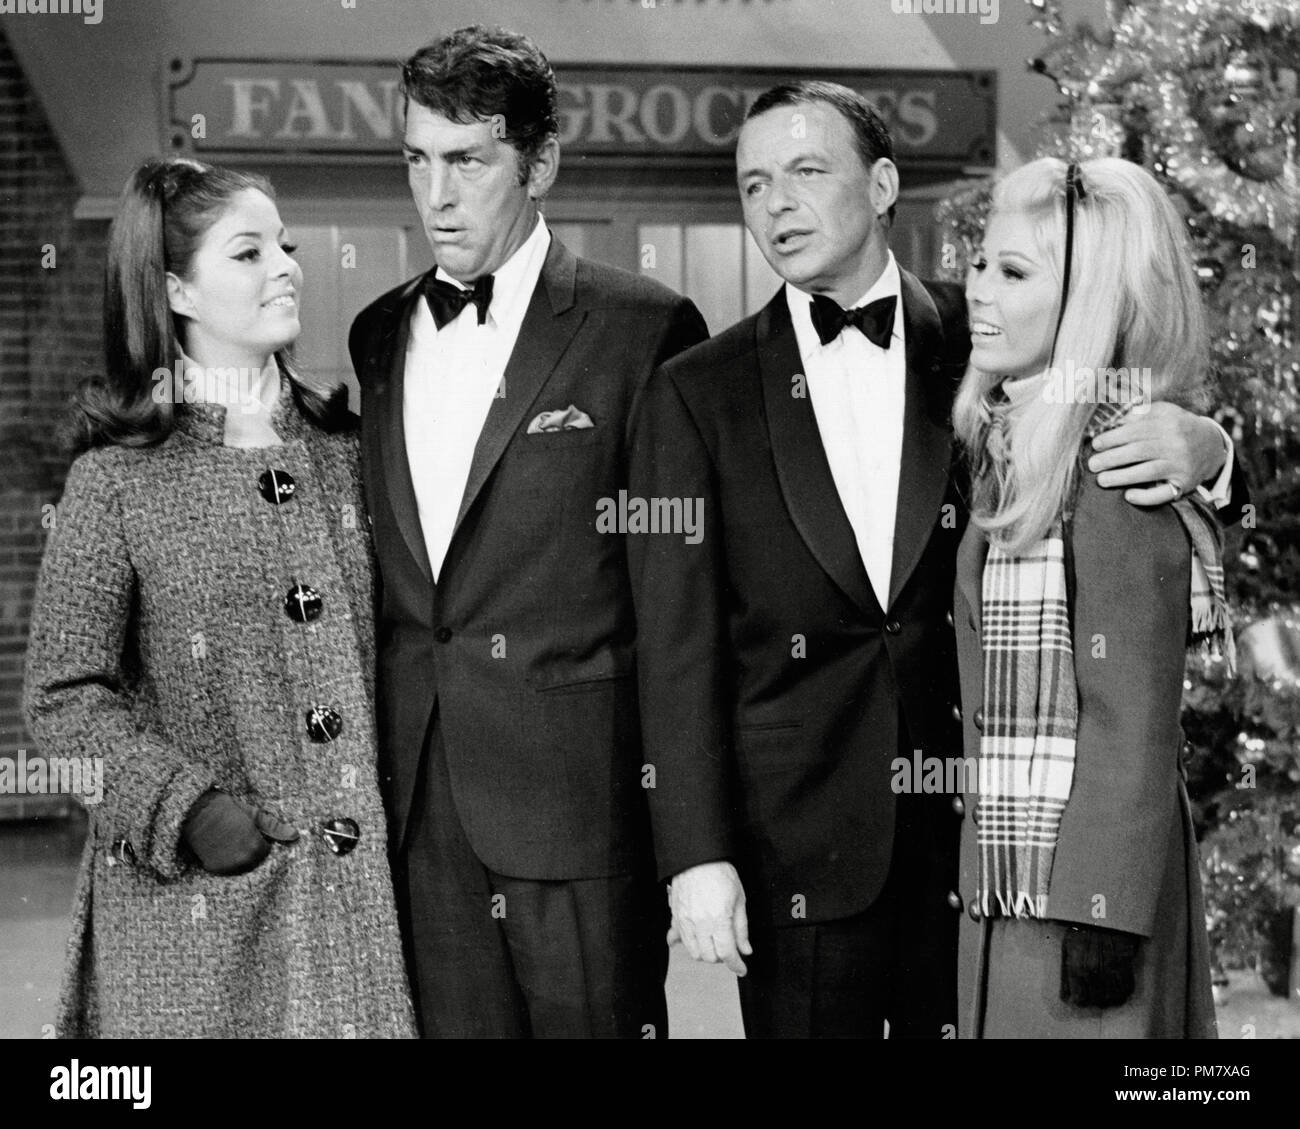 Deana Martin, Dean Martin, Frank Sinatra and Nancy Sinatra 'The Dean Martin Show' Episode dated December 21, 1967   File Reference # 31537 651 Stock Photo